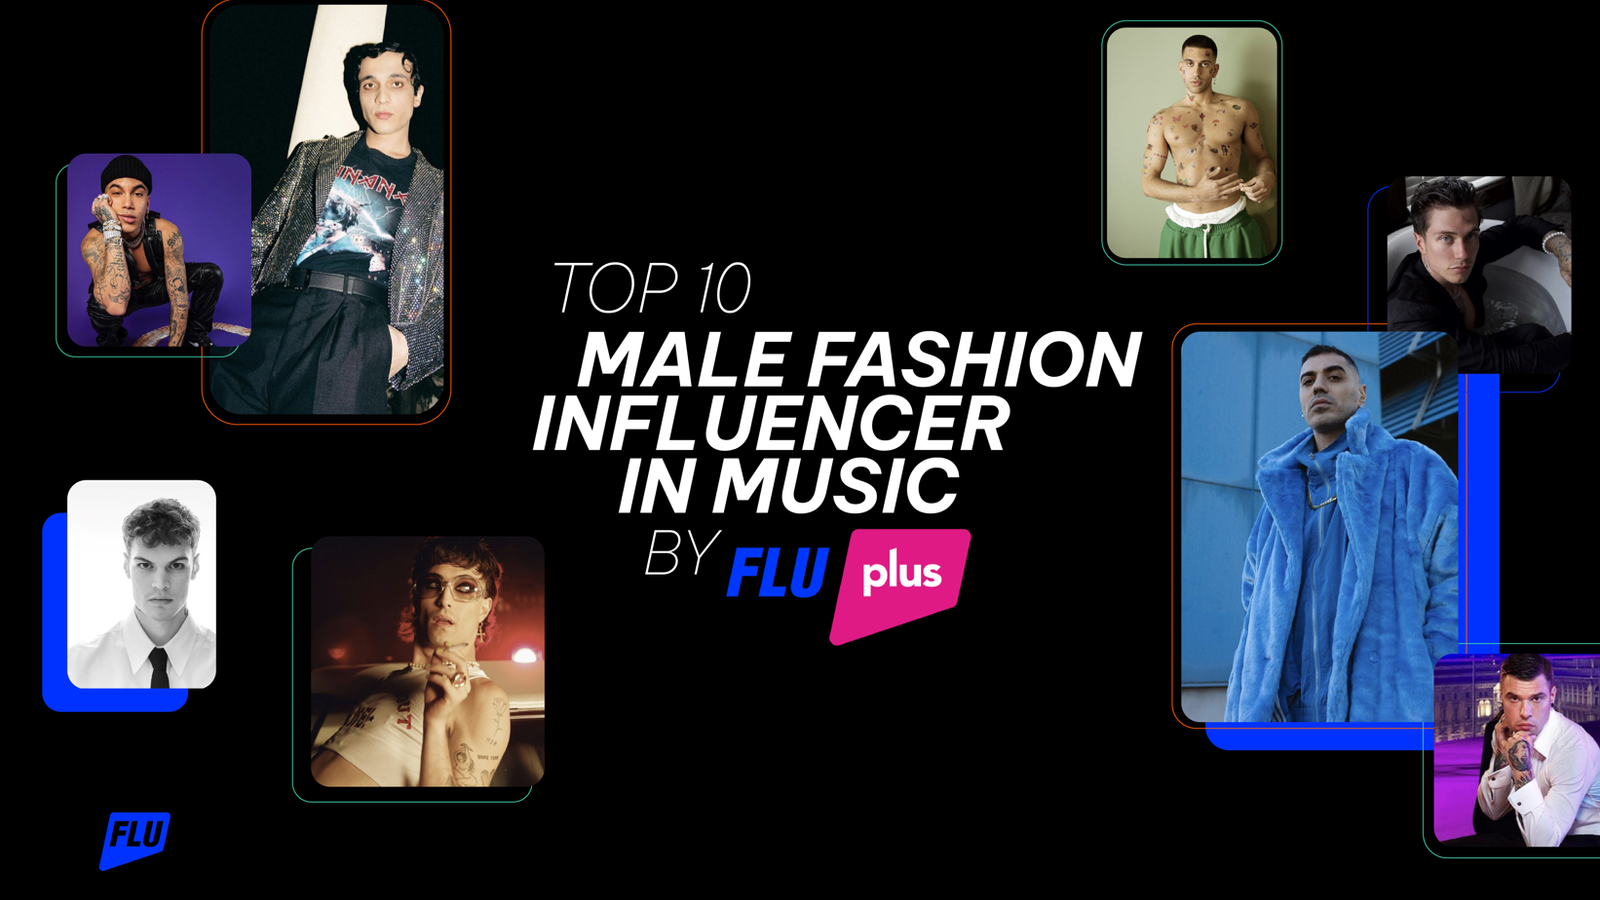 TOP 10 male fashion influencer in music 2022